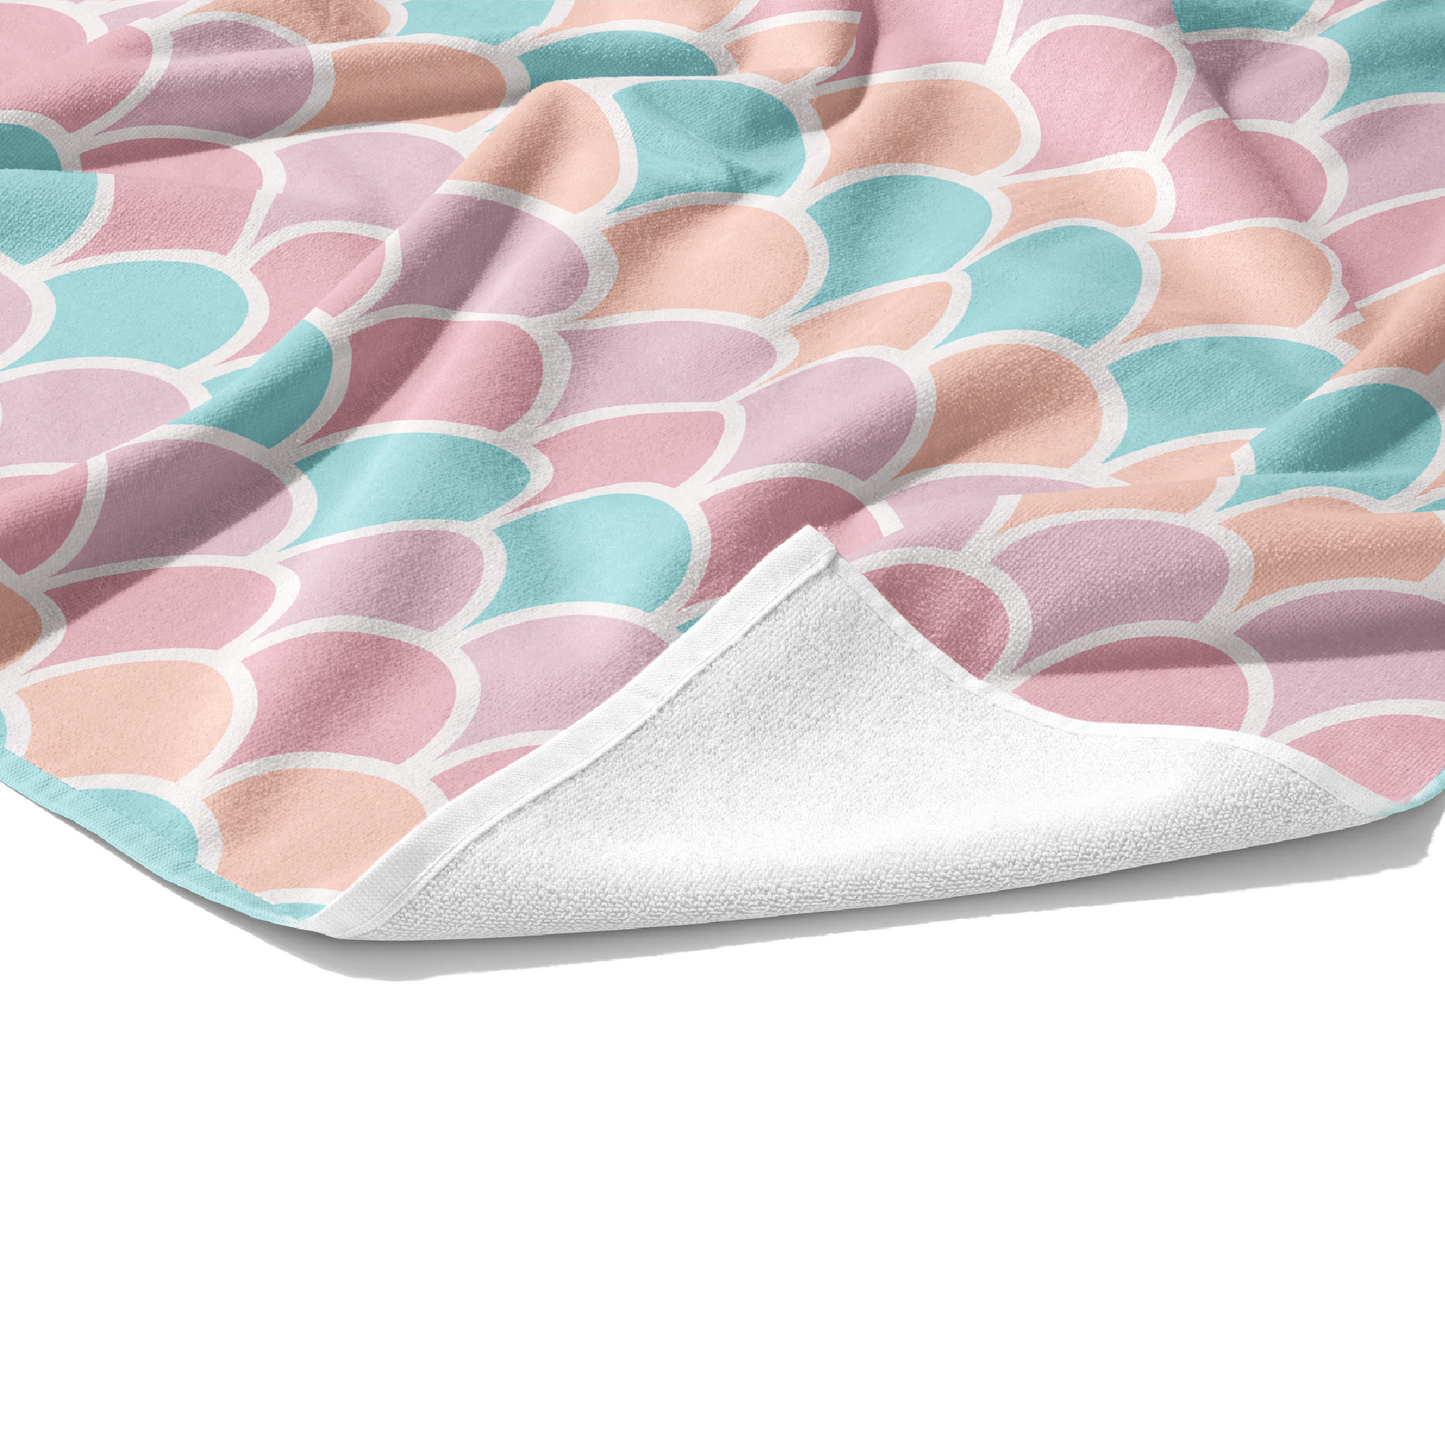 Plush white cotton towel with pink, coral, aqua, and orange print on the front.